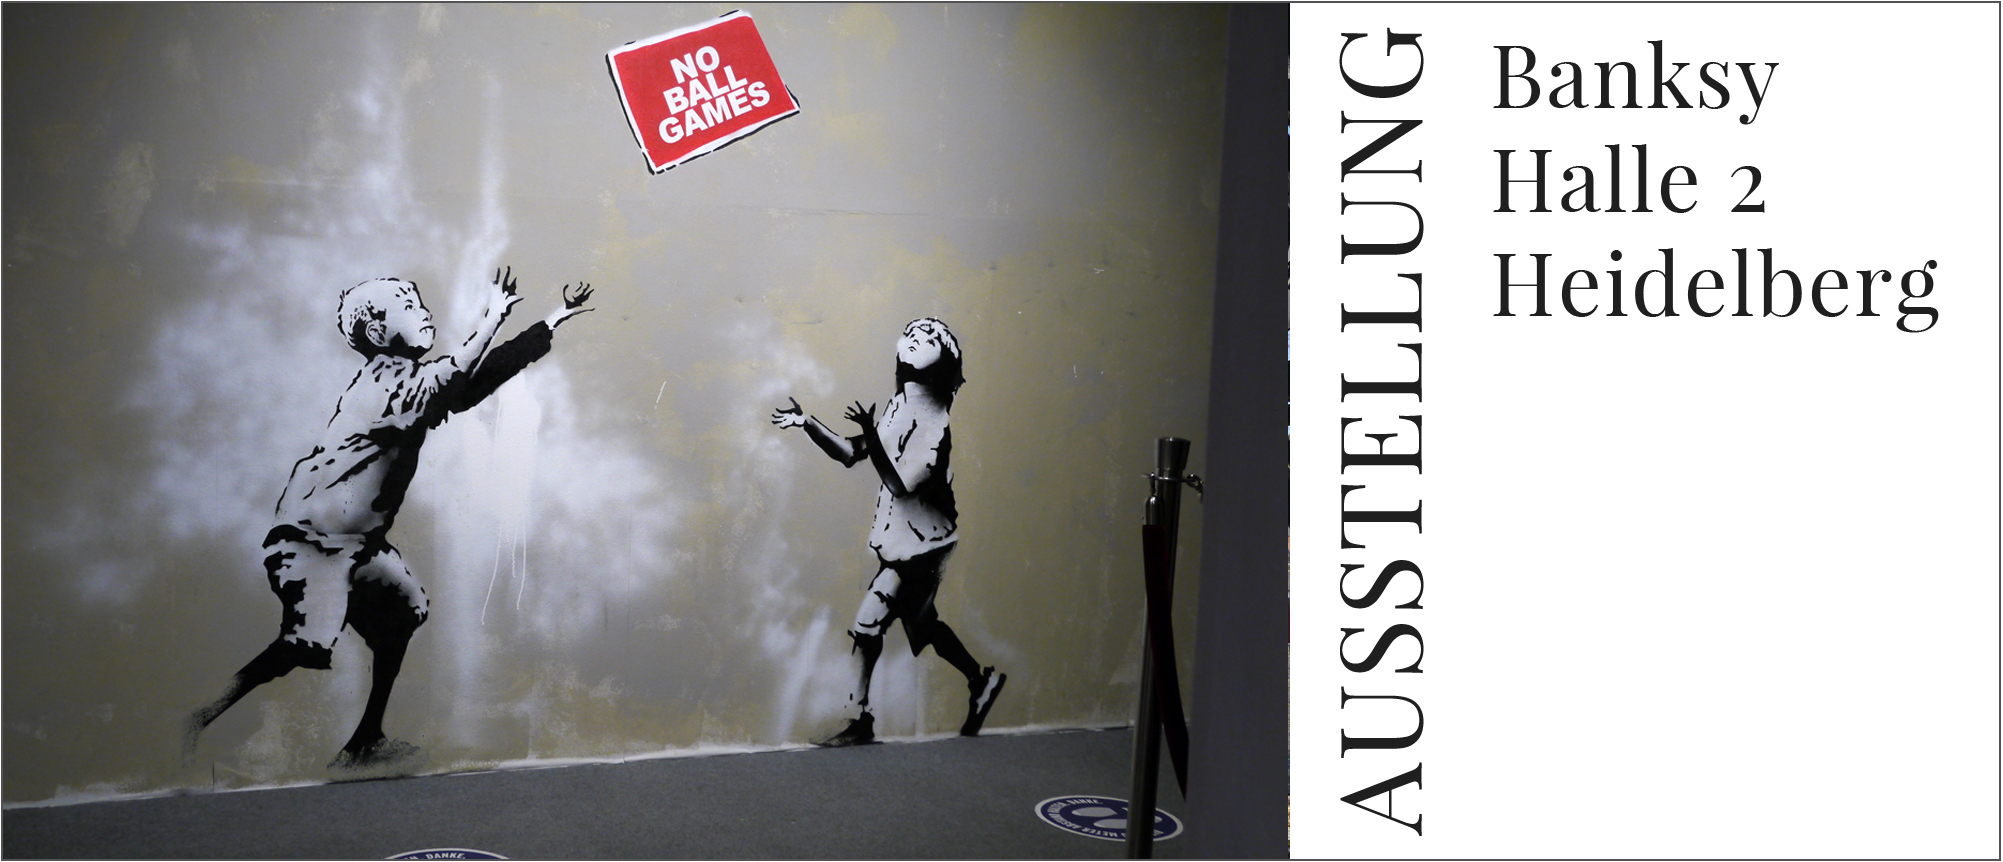 Banksy – The mystery man exhibition